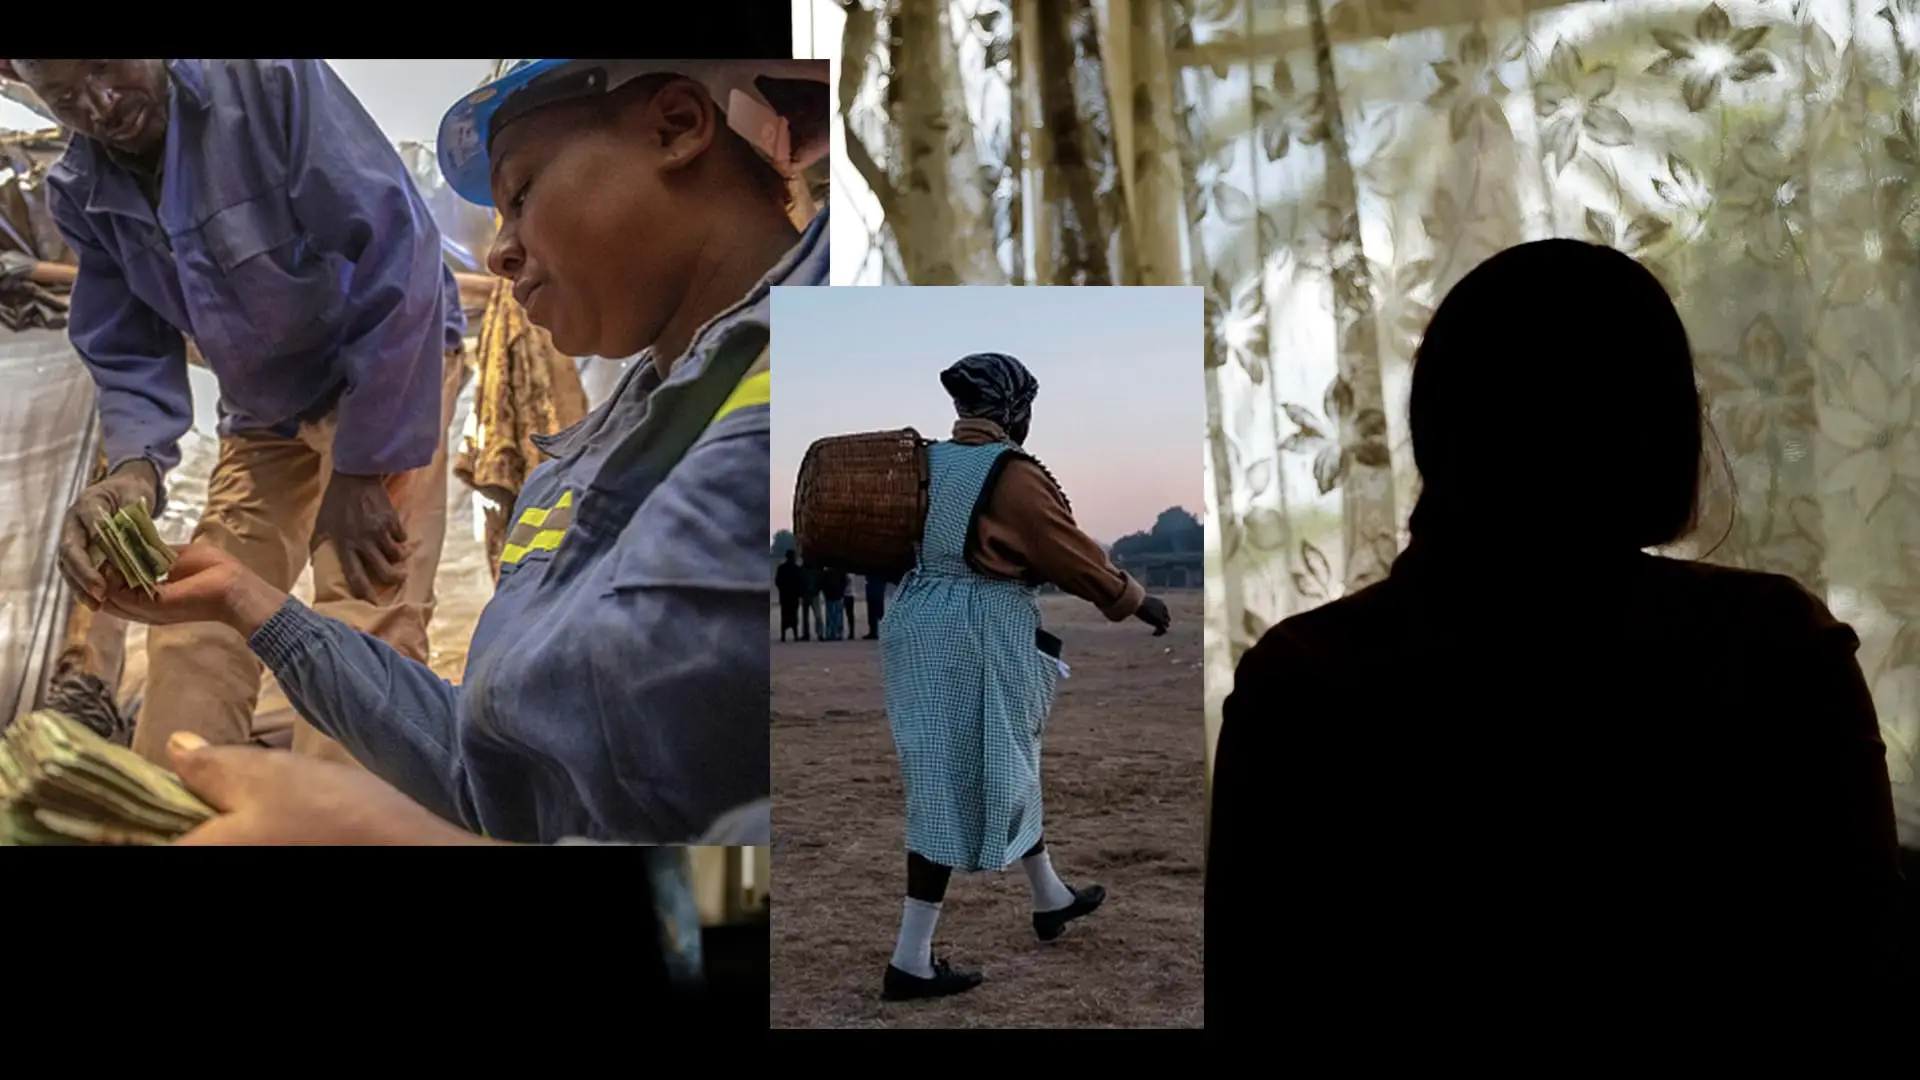 Examining extractivisms gendered violence and honoring the women fighting for change pic